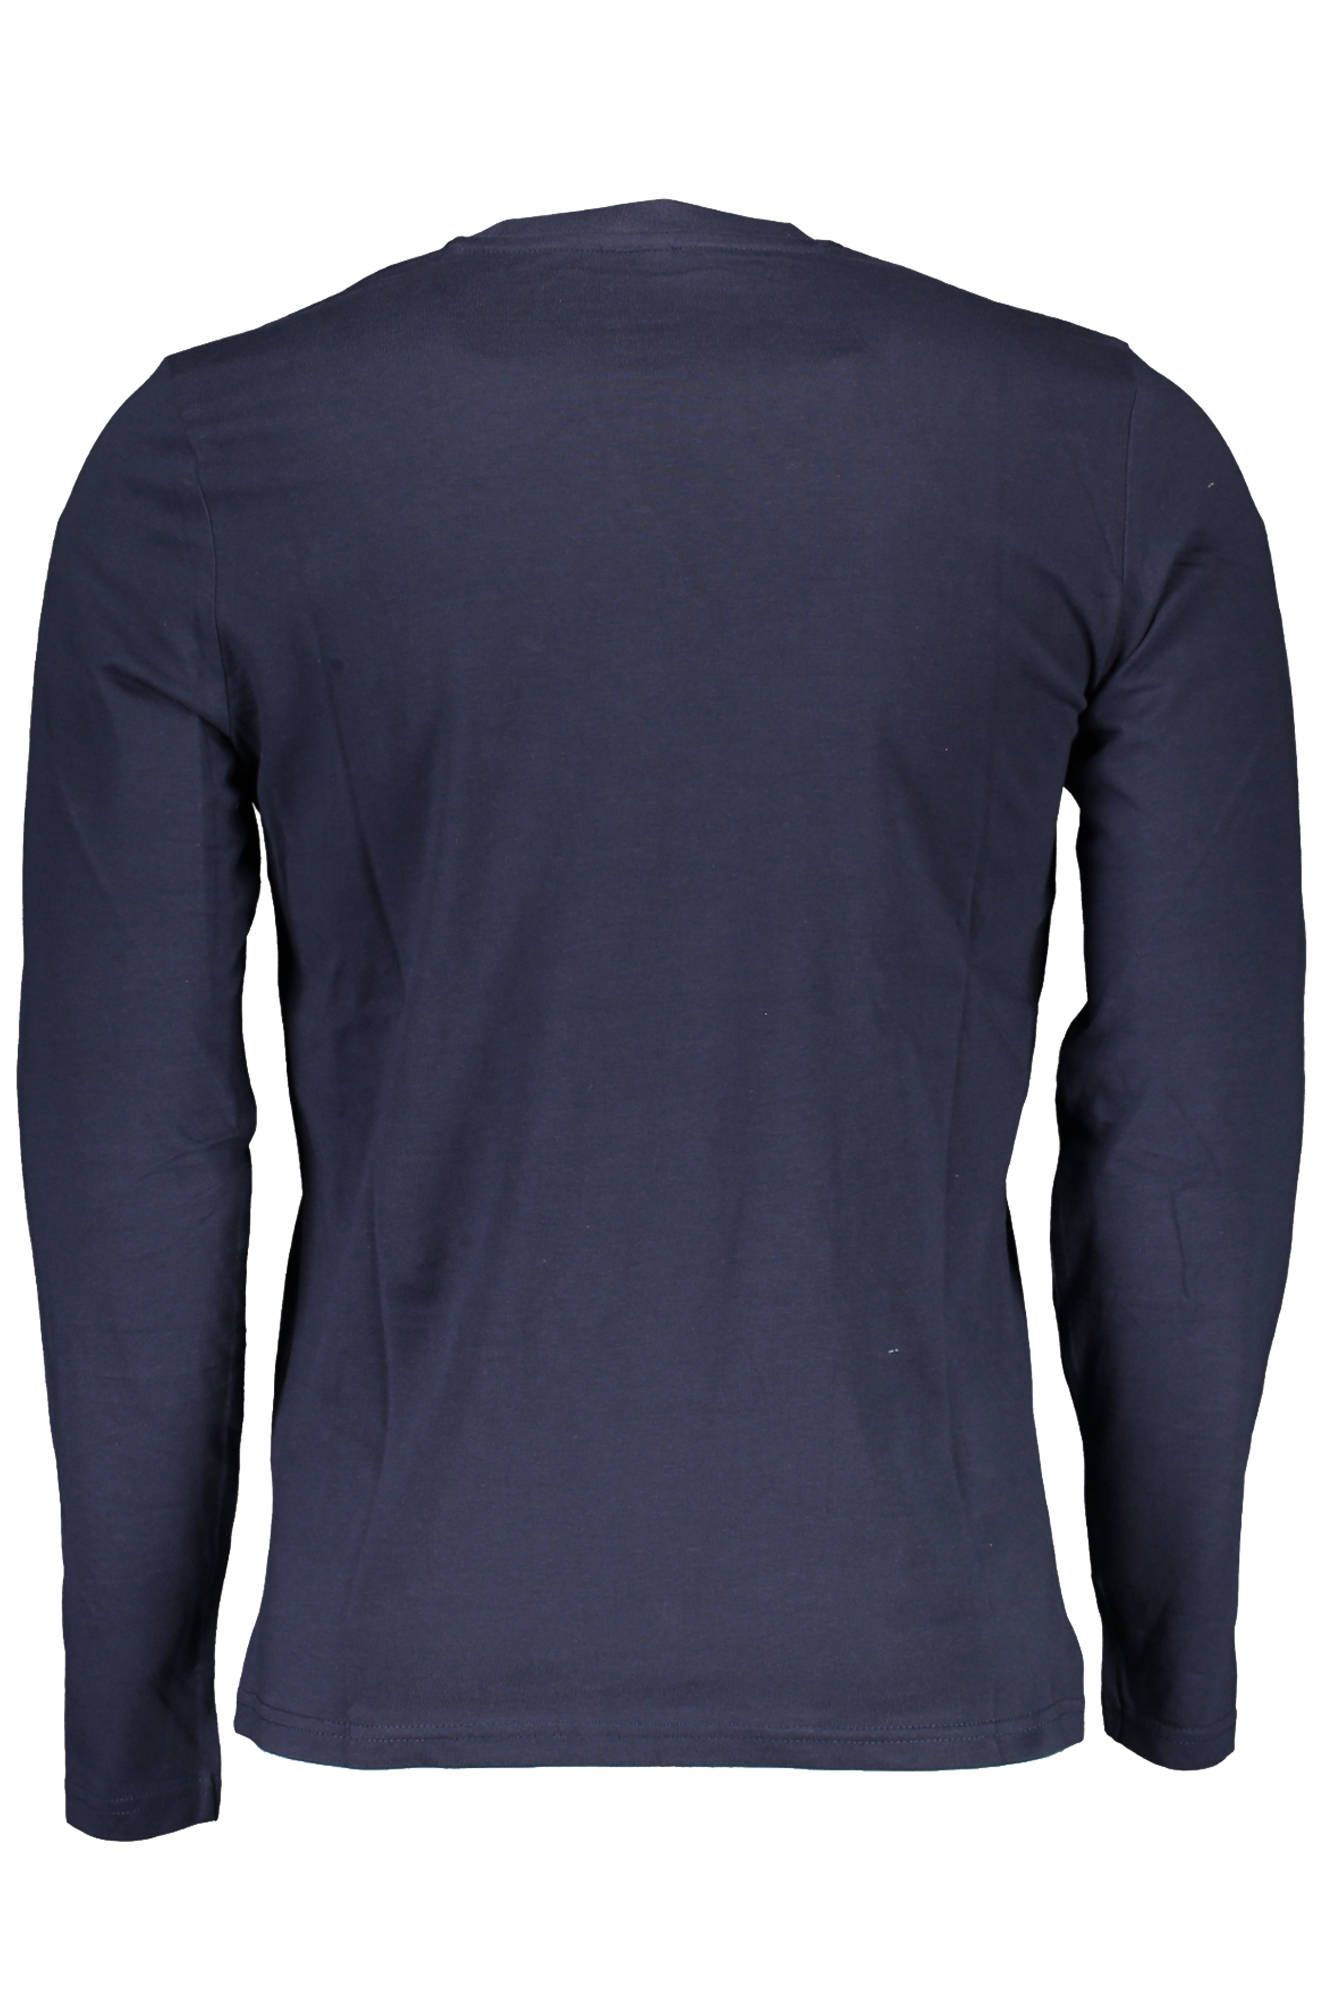 North Sails Blue Long Sleeve Tee with Signature Print